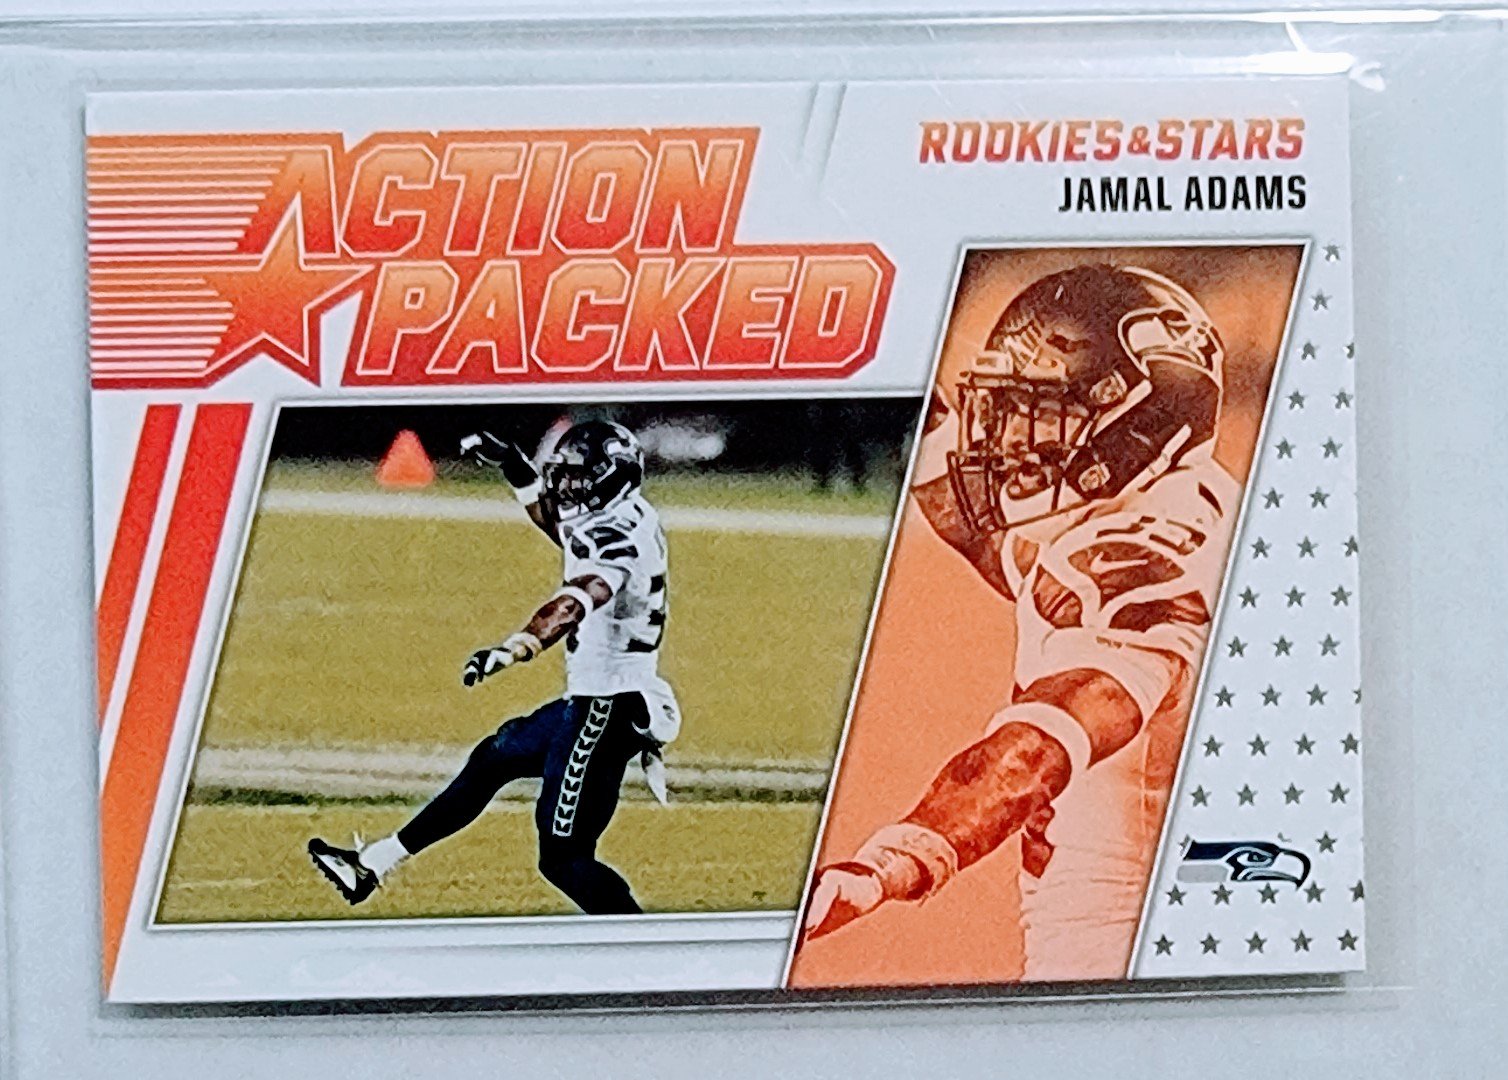 2021 Panini Rookies and Stars Jamal Adams Action Packed Insert Football Card AVM1 simple Xclusive Collectibles   